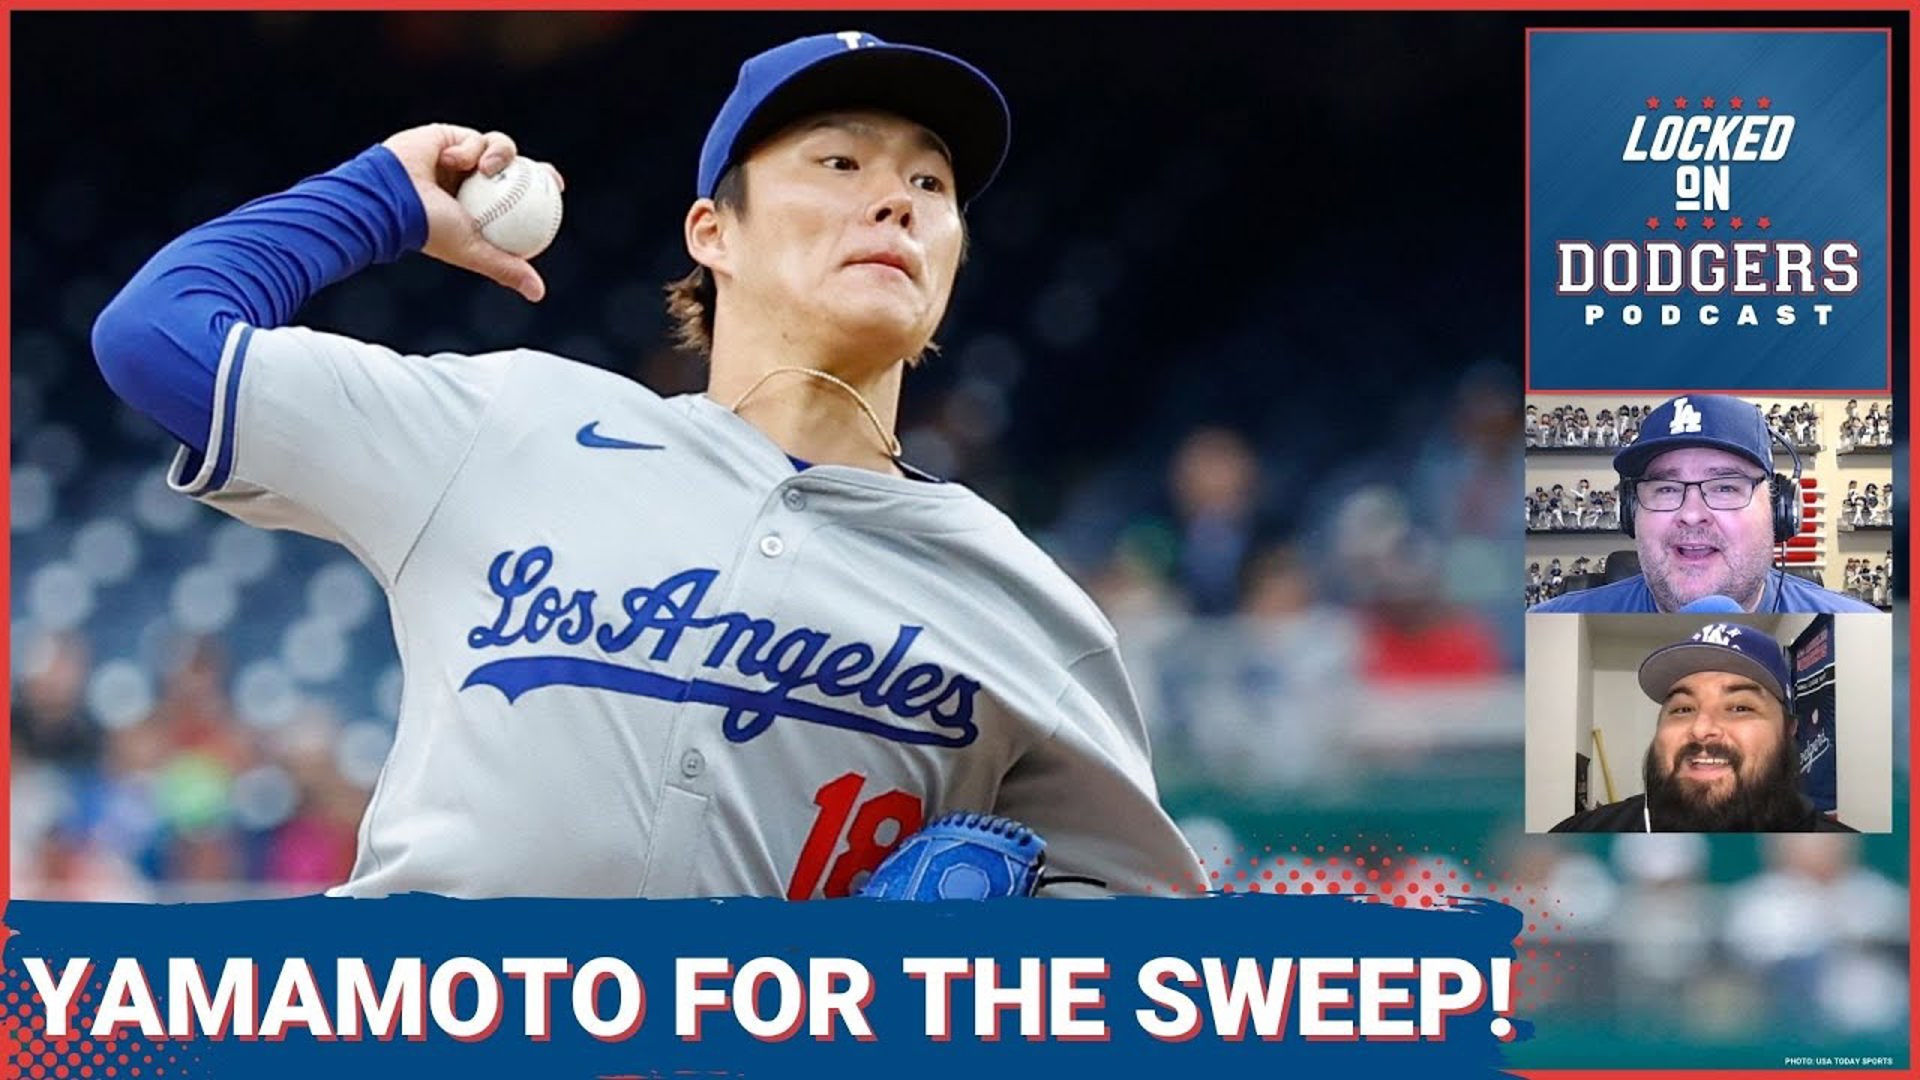 The Los Angeles Dodgers completed a sweep of the Nationals on Thursday in a 2-1 game. Yoshinobu Yamamoto had his best start of the season